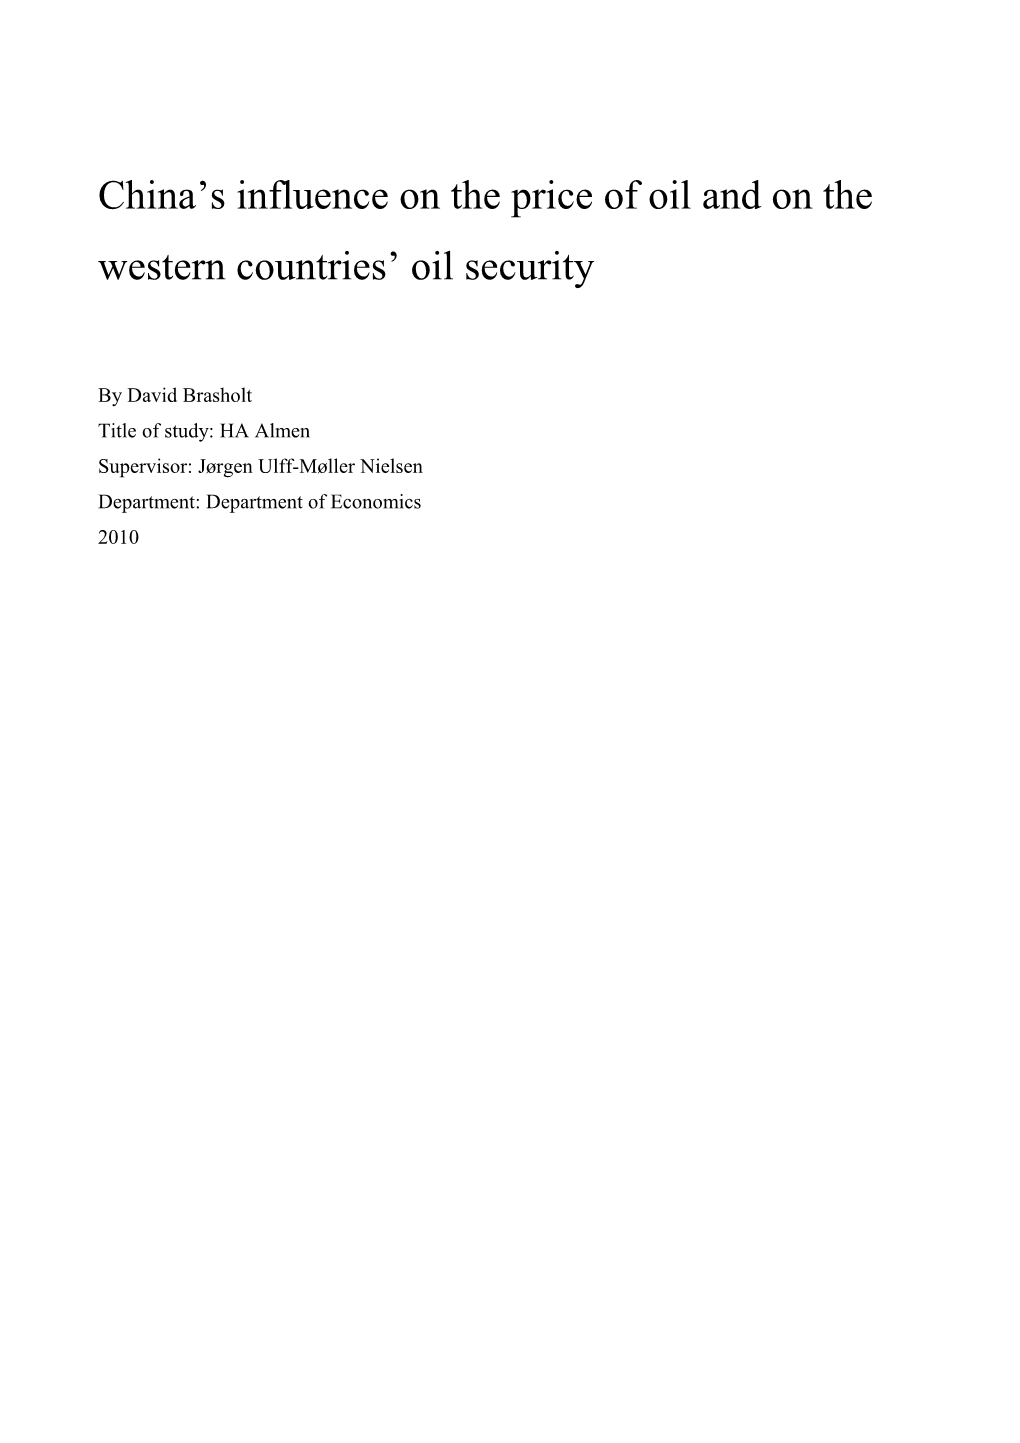 China S Influence on the Price of Oil and on the Western Countries Oil Security